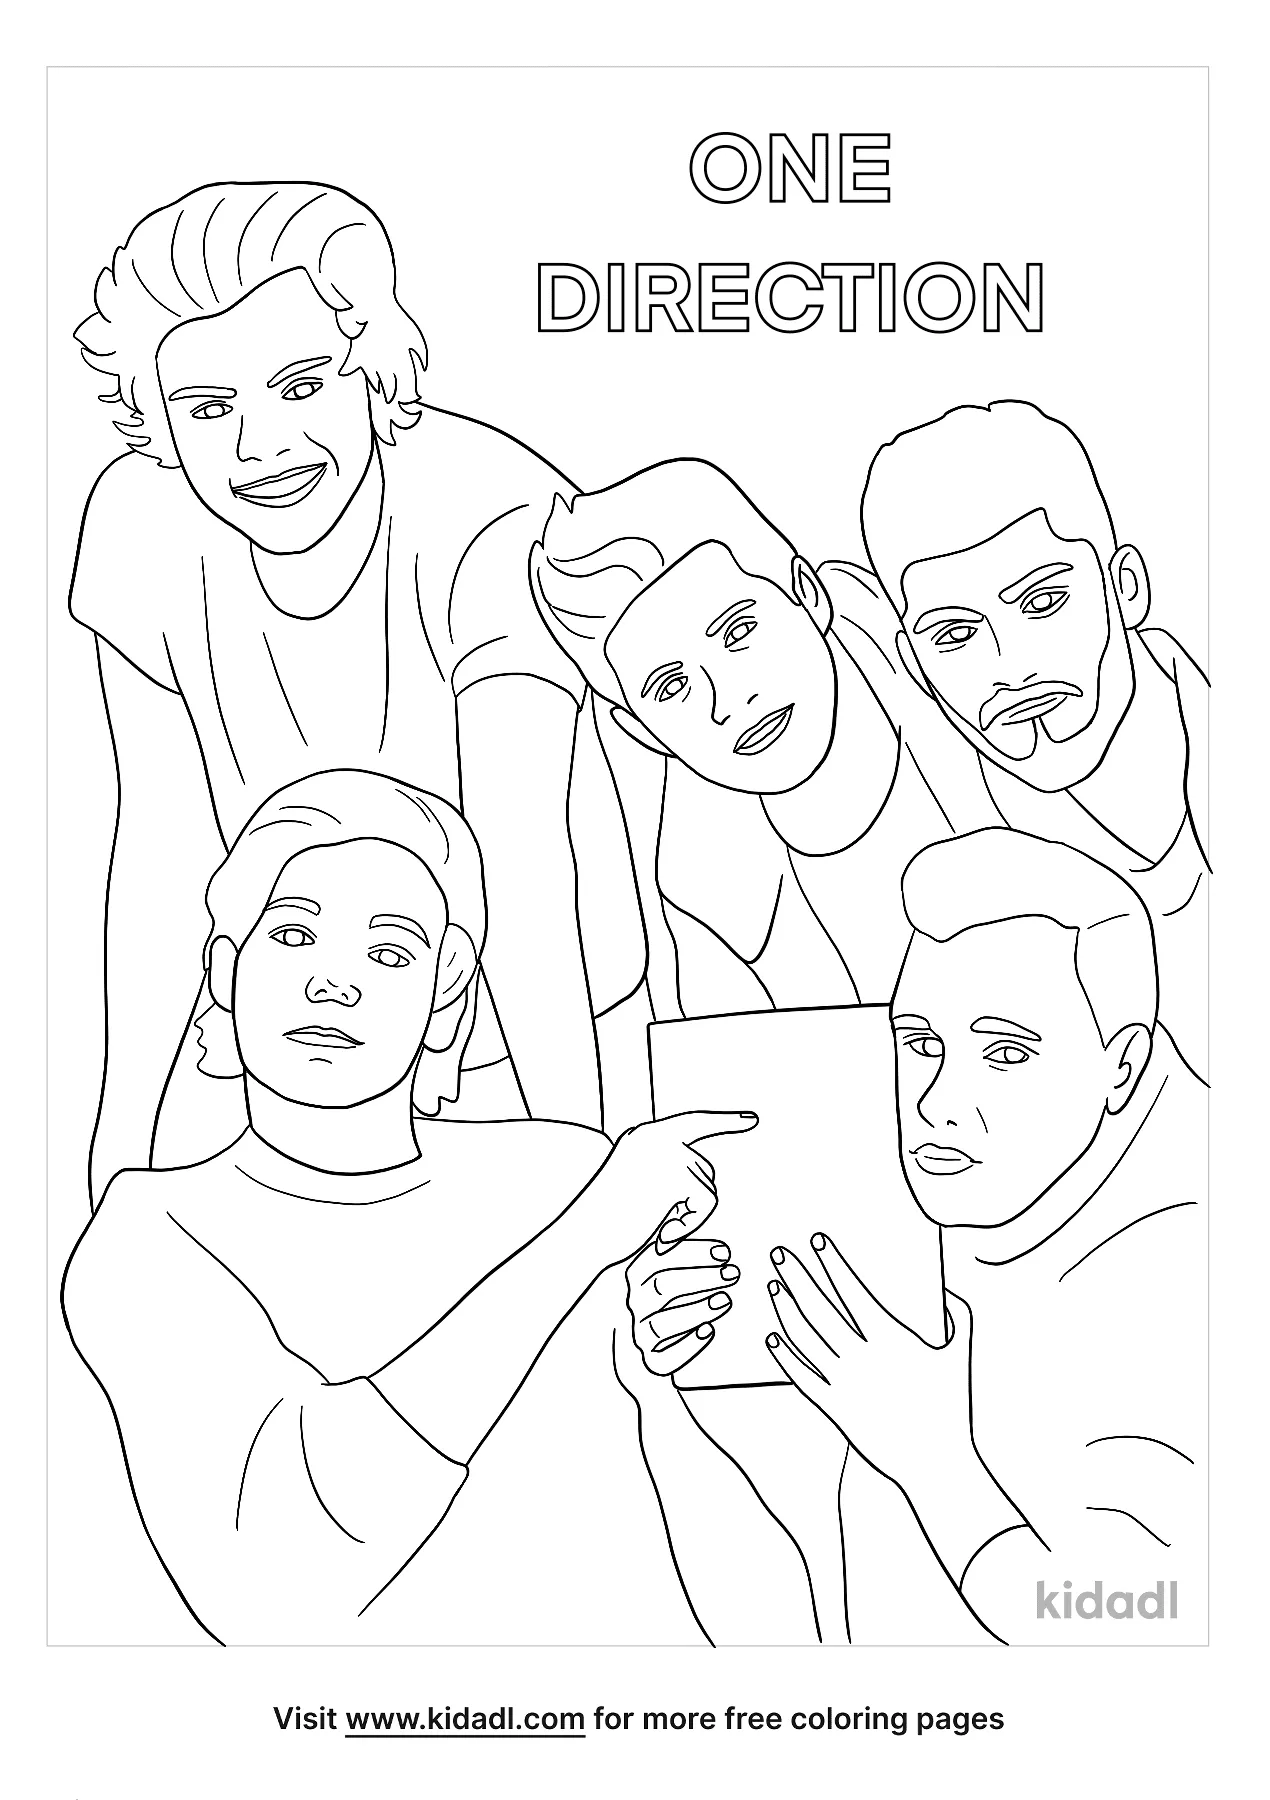 Free Coloring Pages One Direction